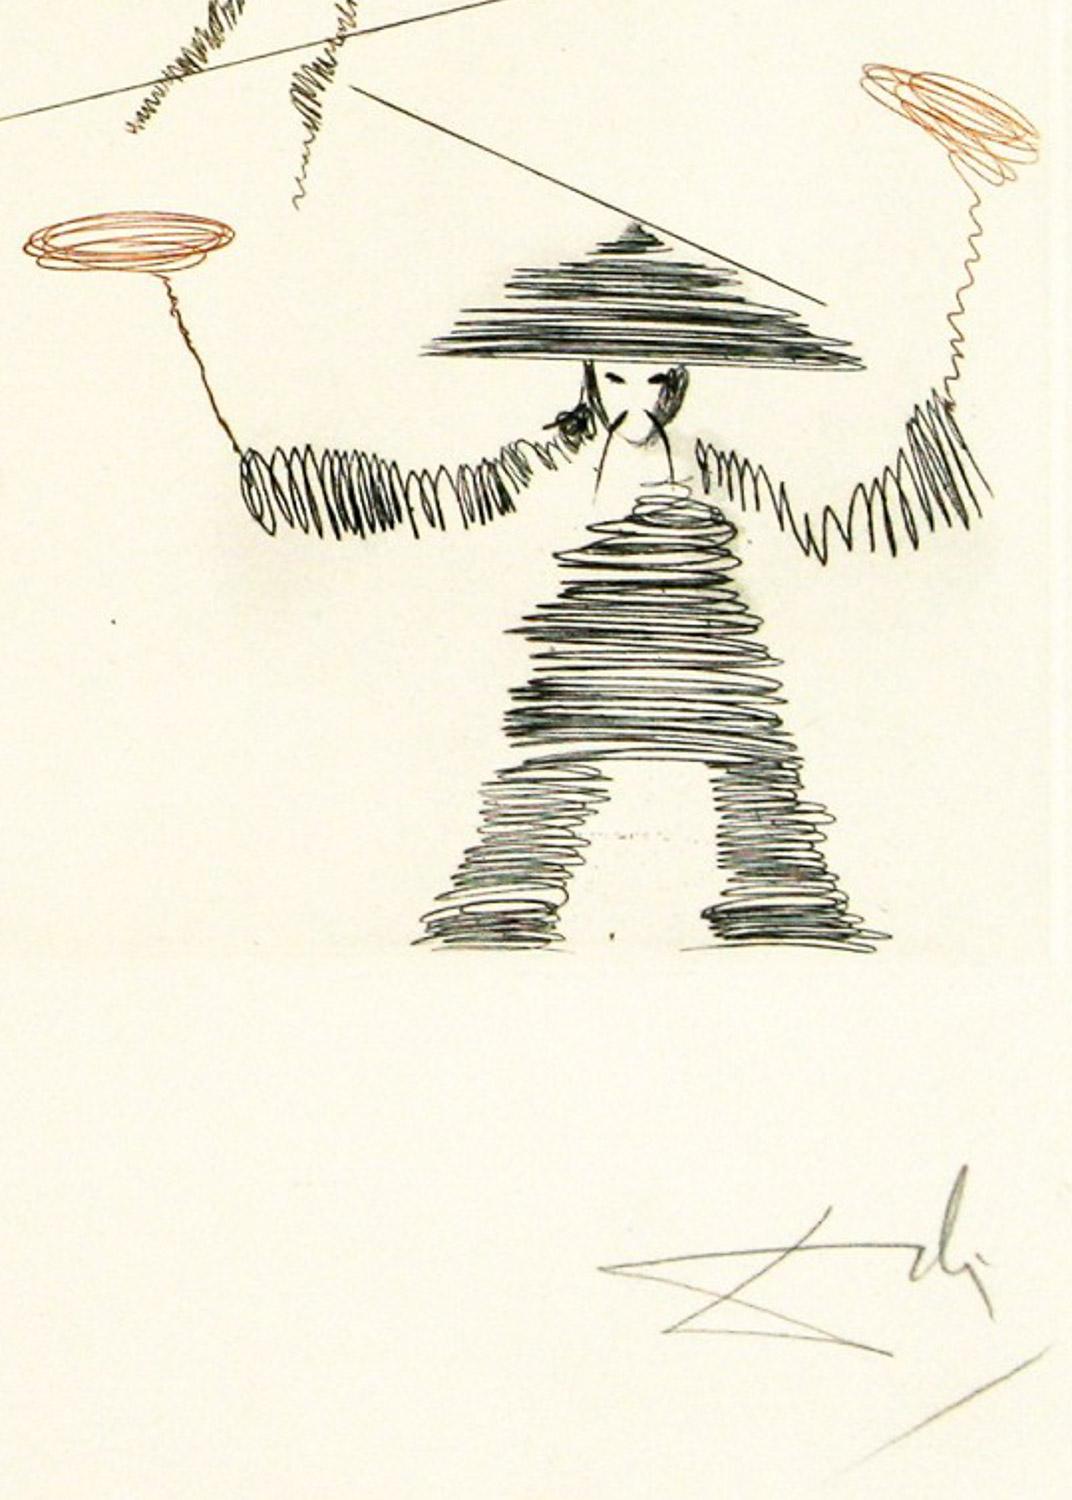 Chinois ( Theatre  Chinois ) etching by Salvador Dali (Weiß), Abstract Print, von Salvador Dalí